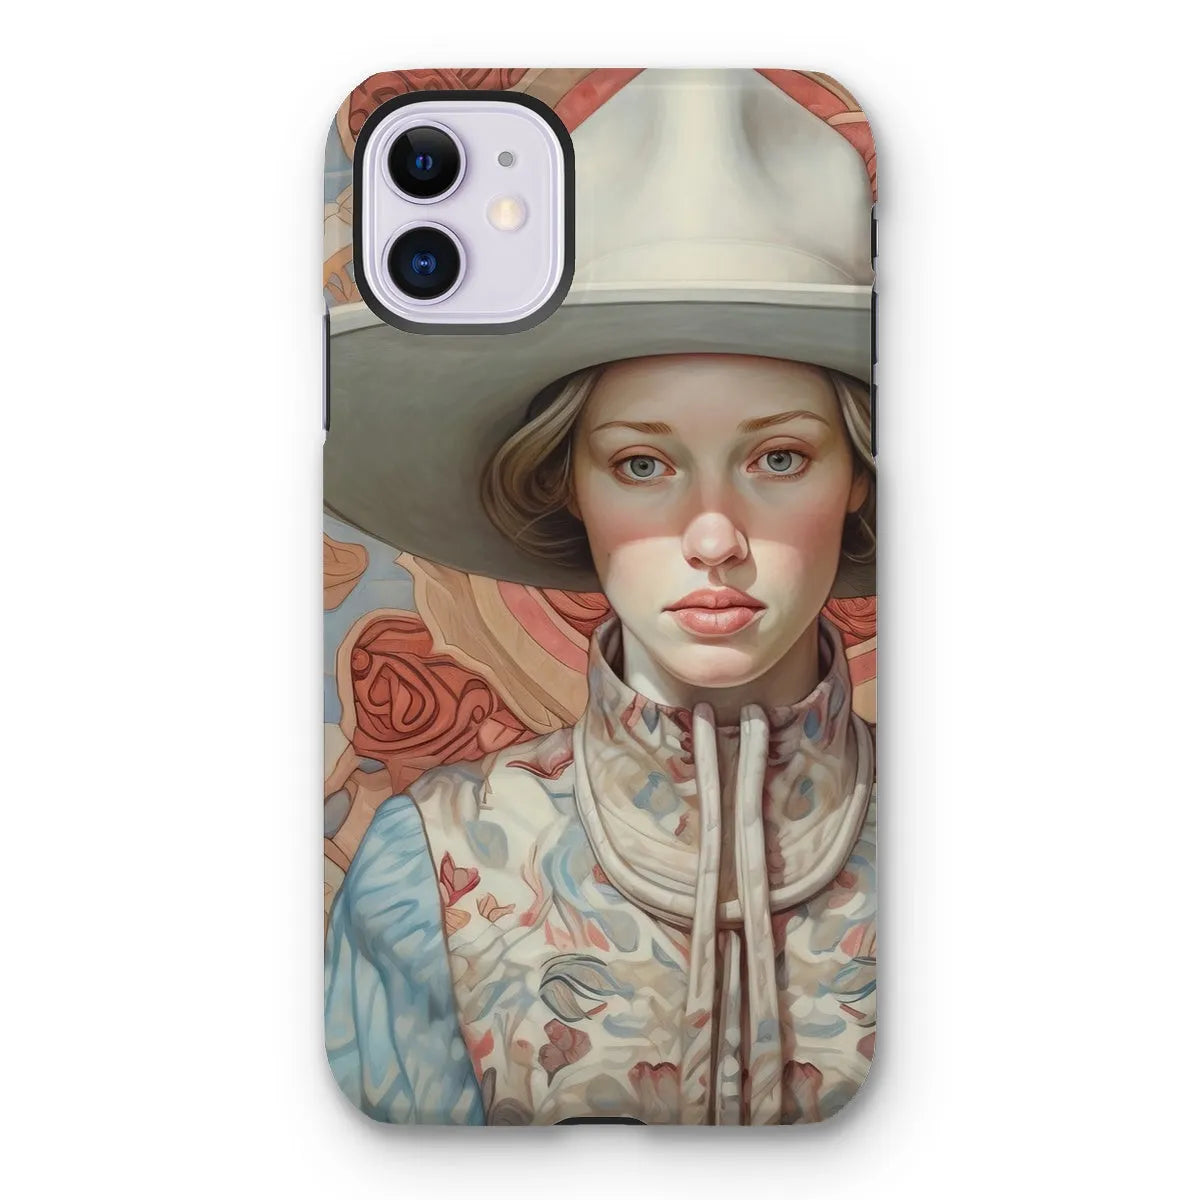 Lottie The Lesbian Cowgirl - Sapphic Art Phone Case - Iphone 11 / Matte - Mobile Phone Cases - Aesthetic Art